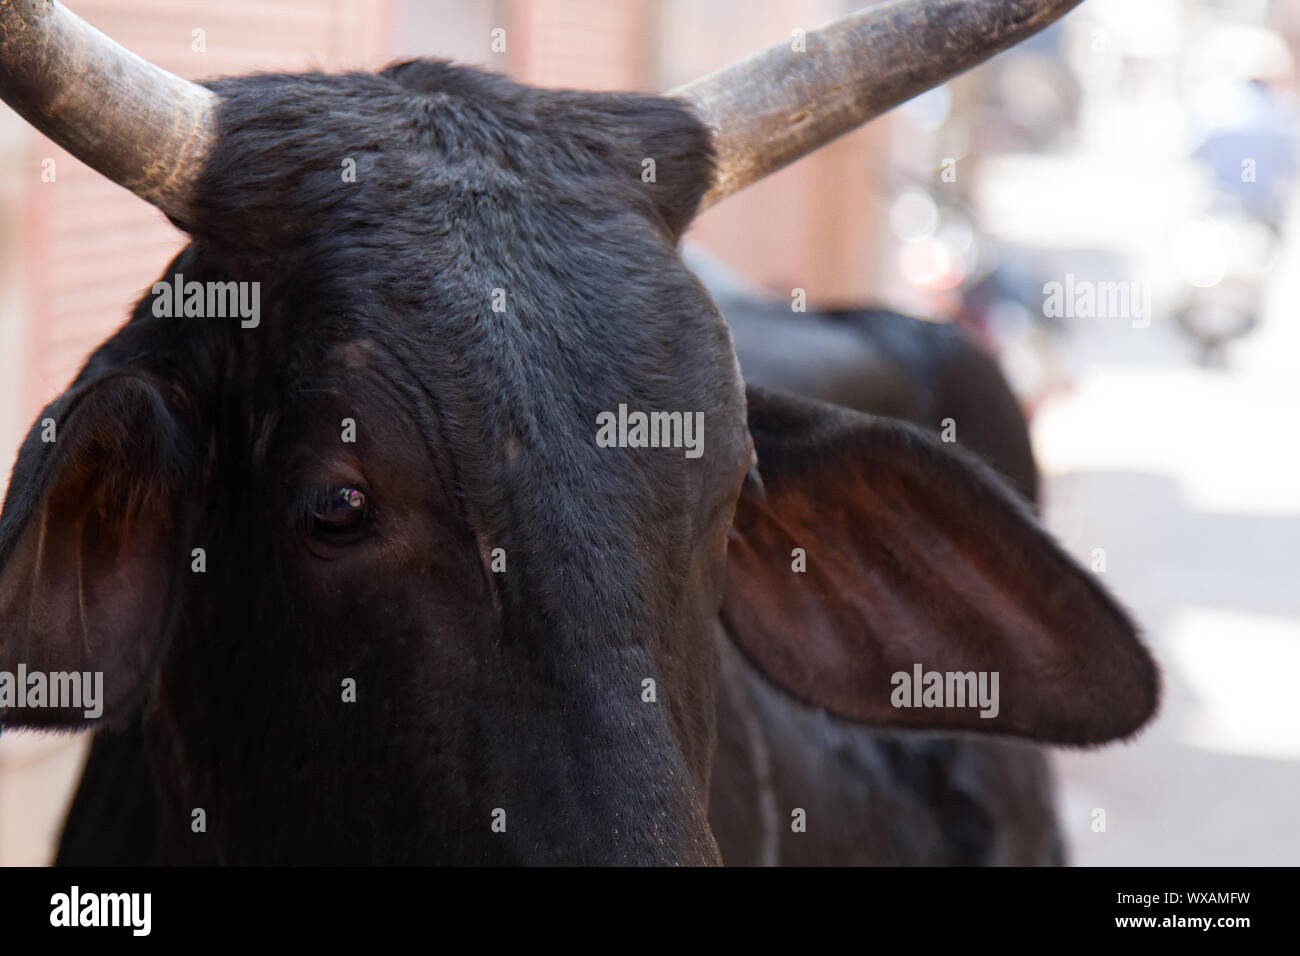 Portrait of Indian sacred cow close-up Stock Photo